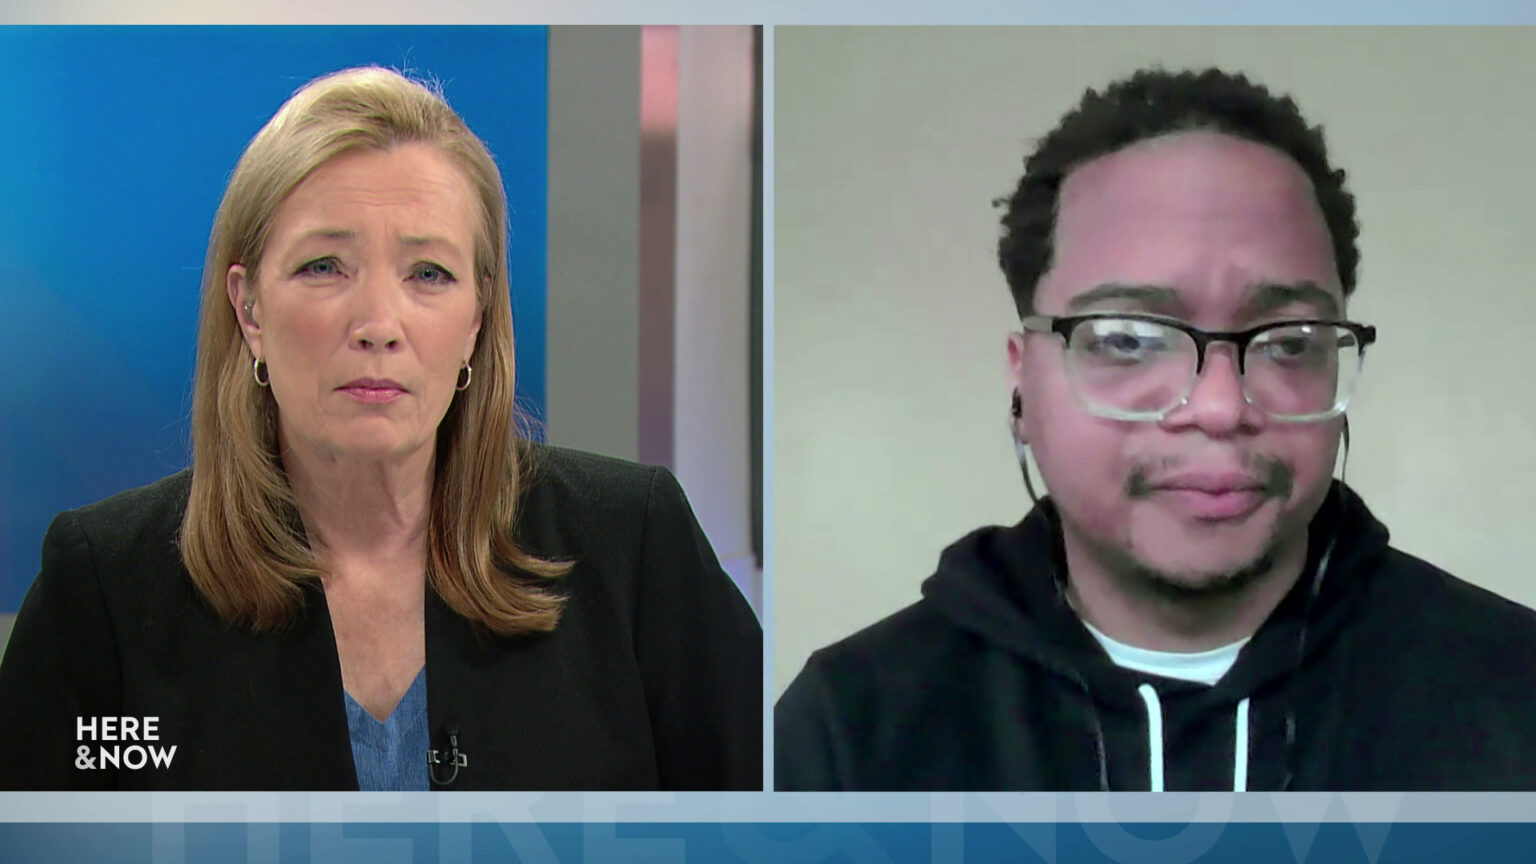 From left to right, a split screen with Frederica Freyberg and Jamaal Smith seated in different locations